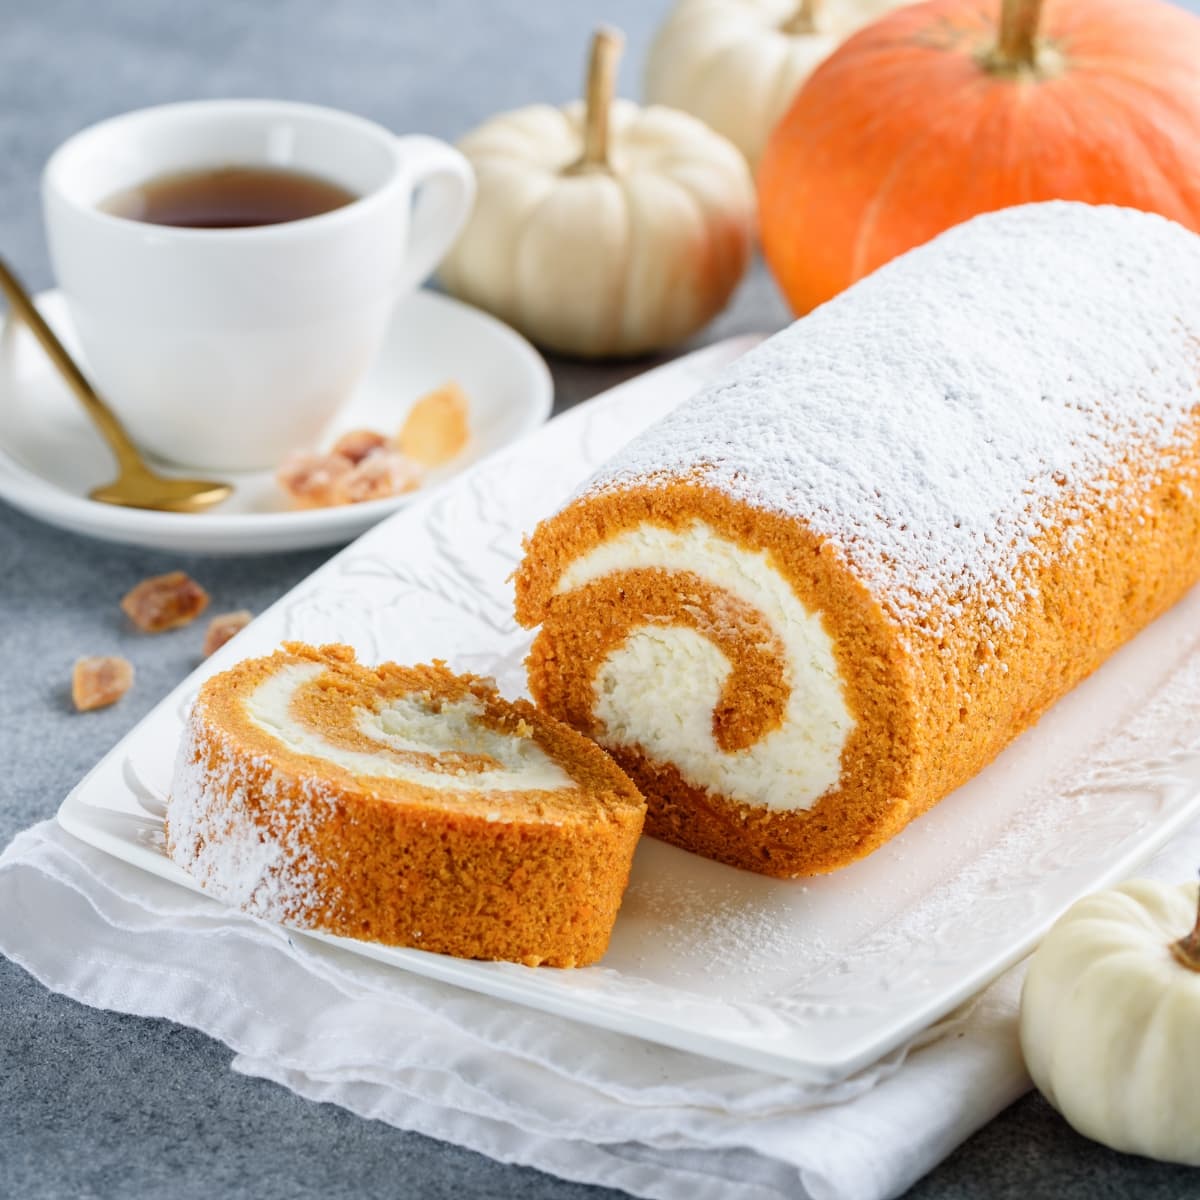 Libby’s Pumpkin Roll Sliced, Served on a Plate